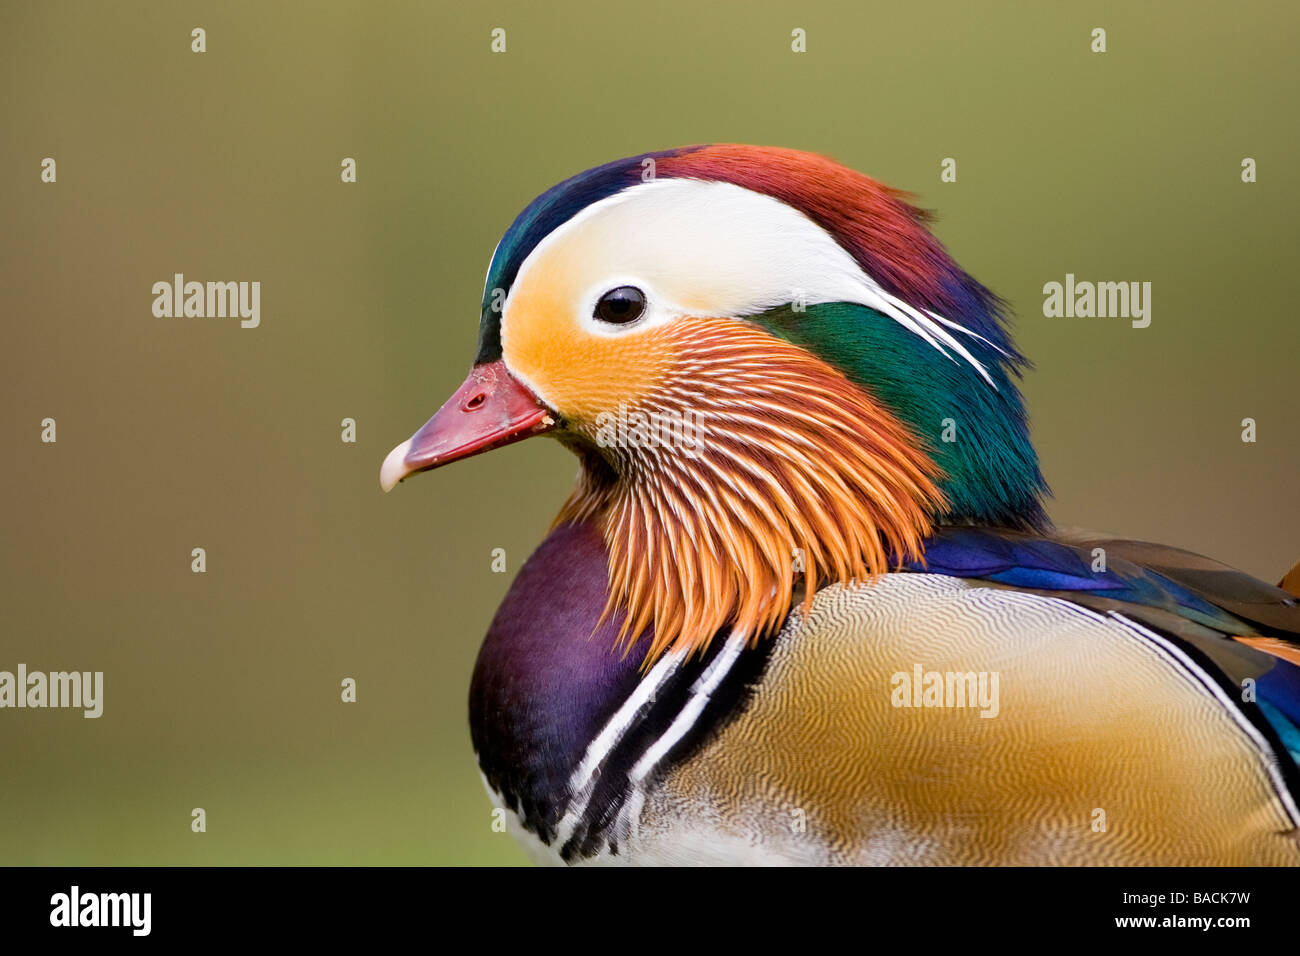 8 Colorful Facts About Mandarin Ducks